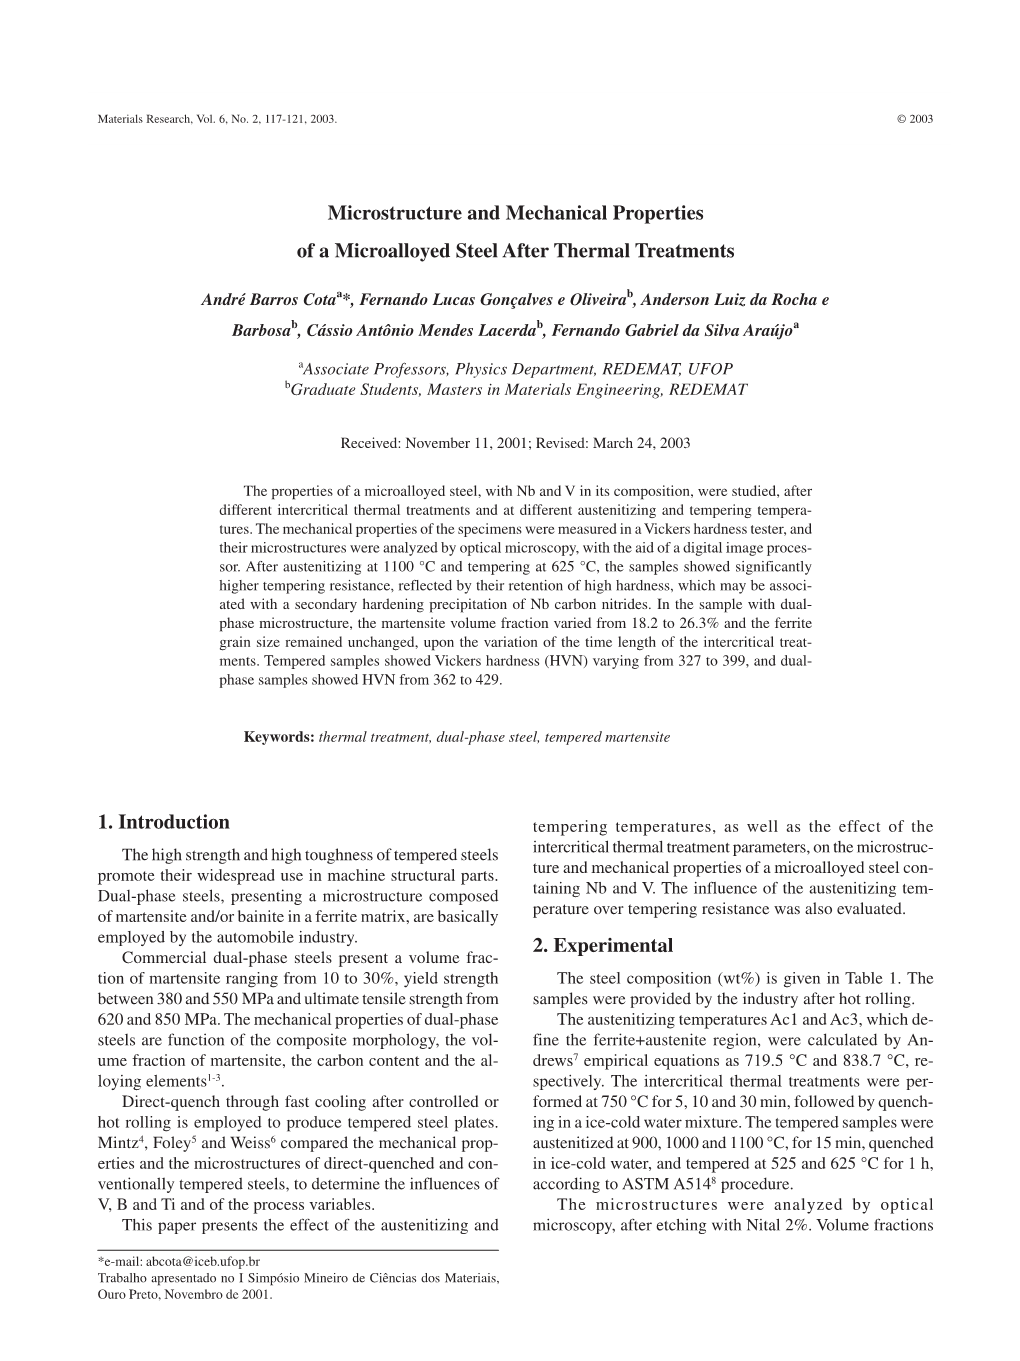 Microstructure and Mechanical Properties of a Microalloyed Steel After Thermal Treatments